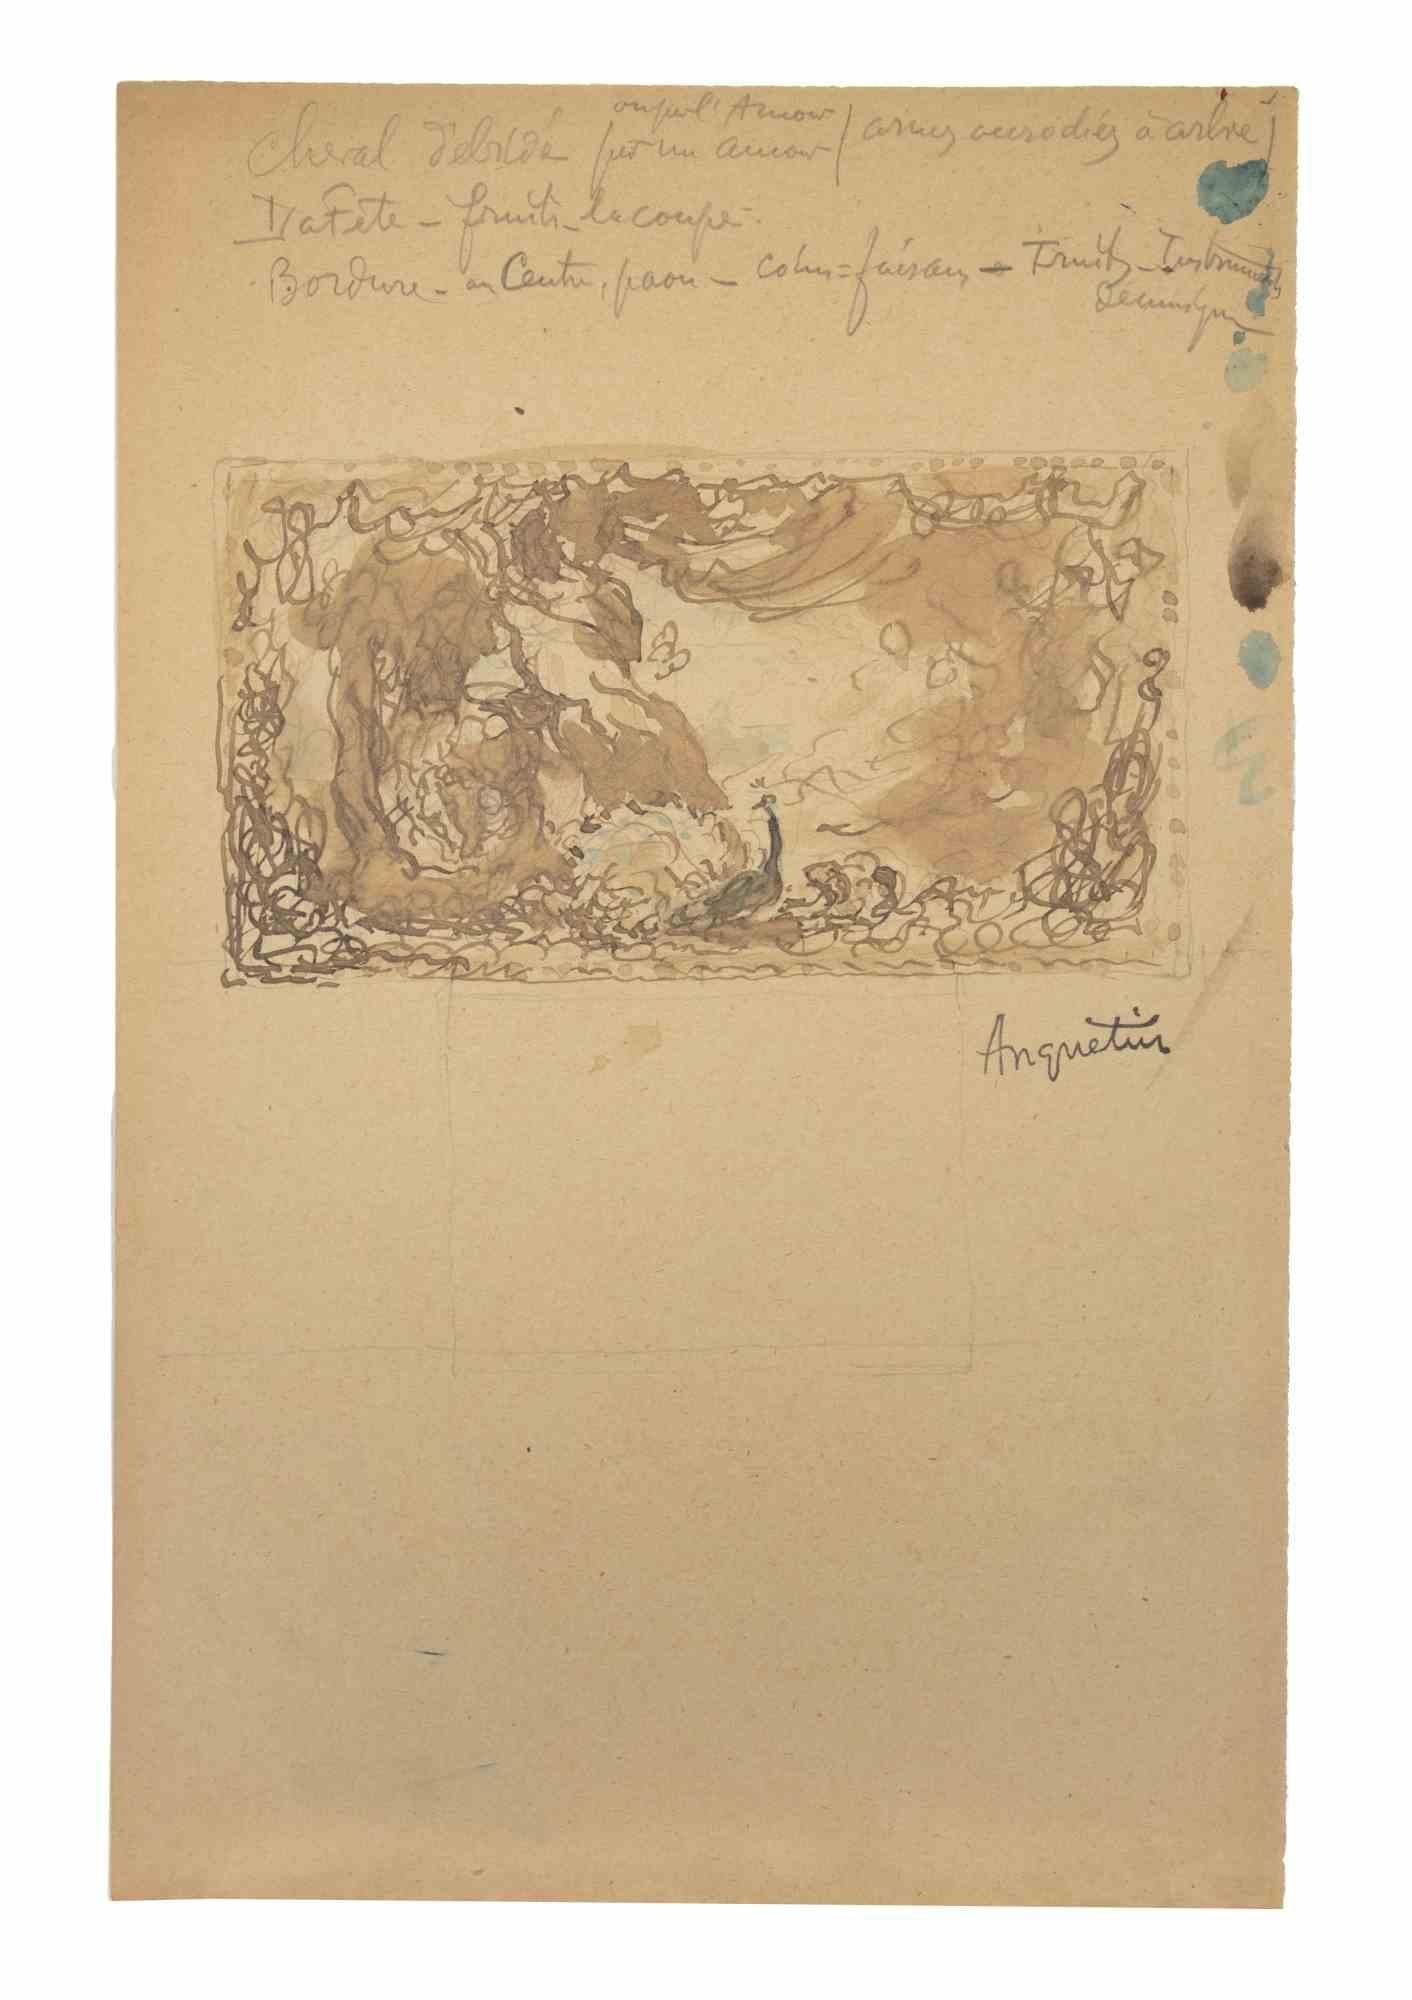 The Bird e is an ink drawing on paper realized in the early 20th Century by Louis Anquetin (1861-1932).

Hand-signed on the lower.

Good condition with slight foxing.

Louis Émile Anquetin (26 January 1861 – 19 August 1932) was a French painter. In